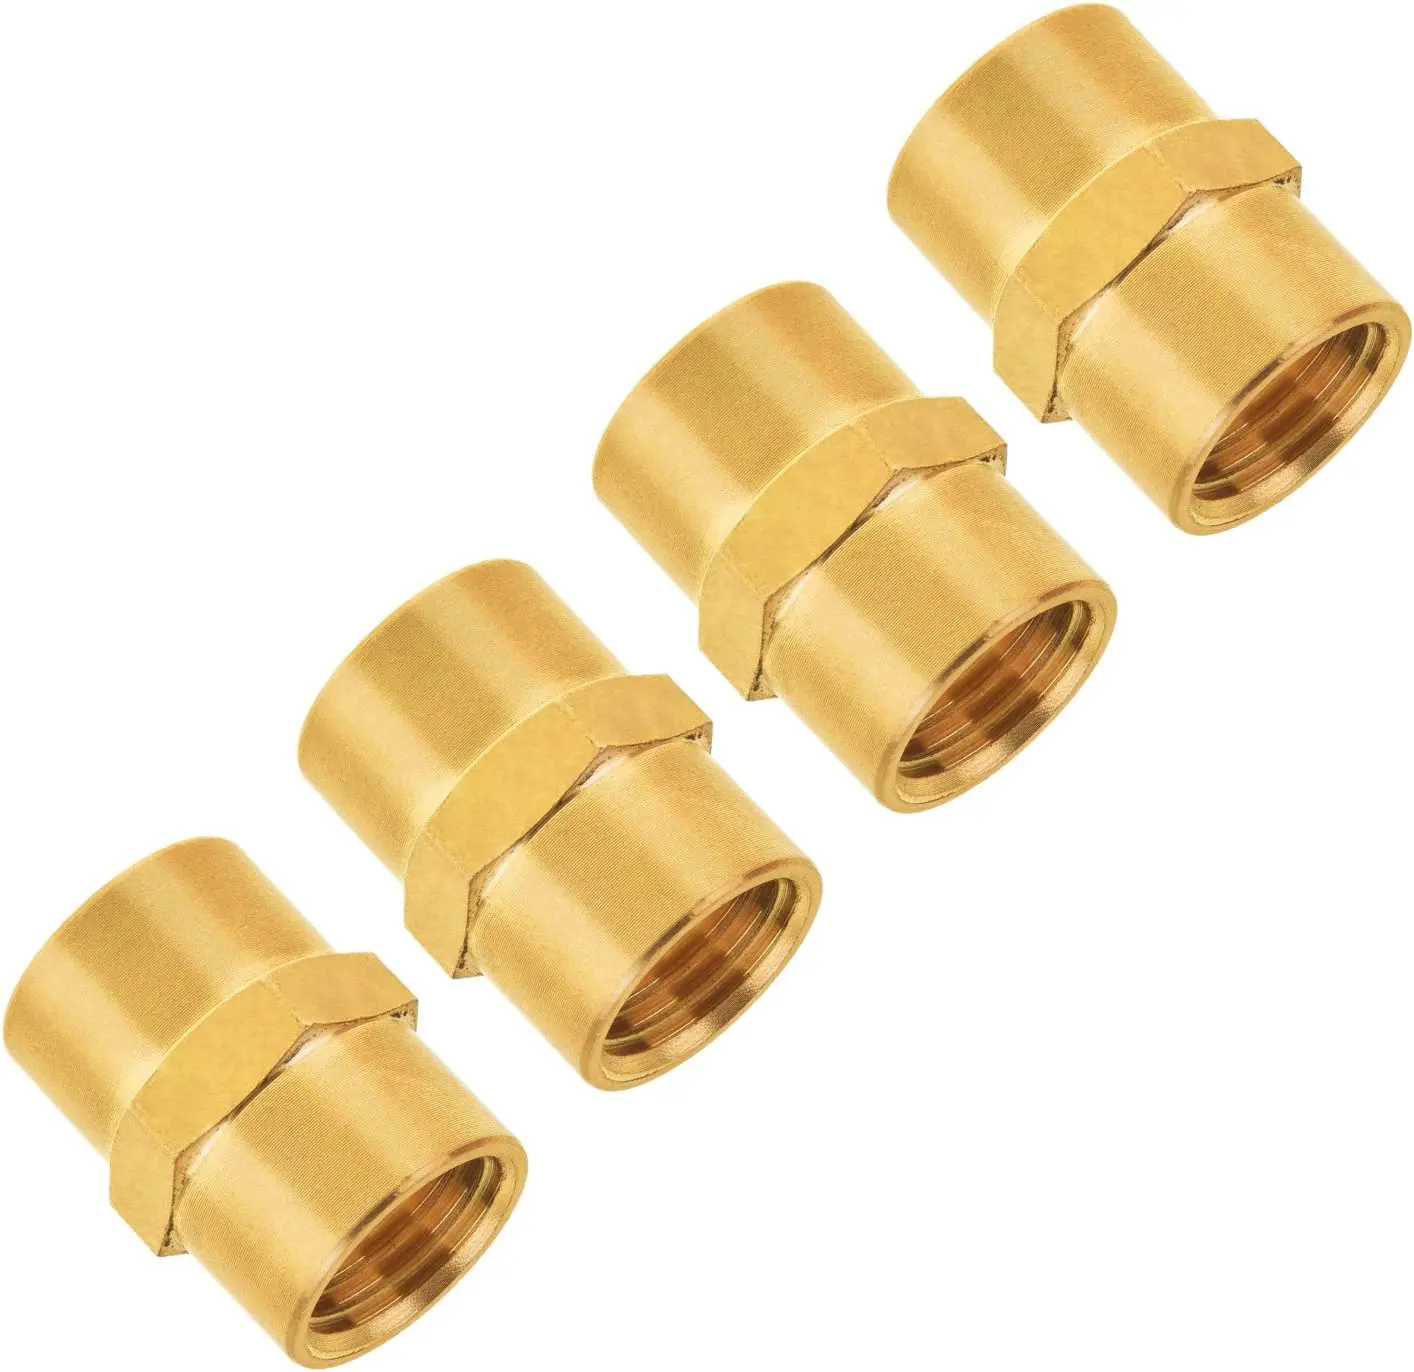 ISO9001 standard quick coupling Fittings BSPP /NPT Threads Socket